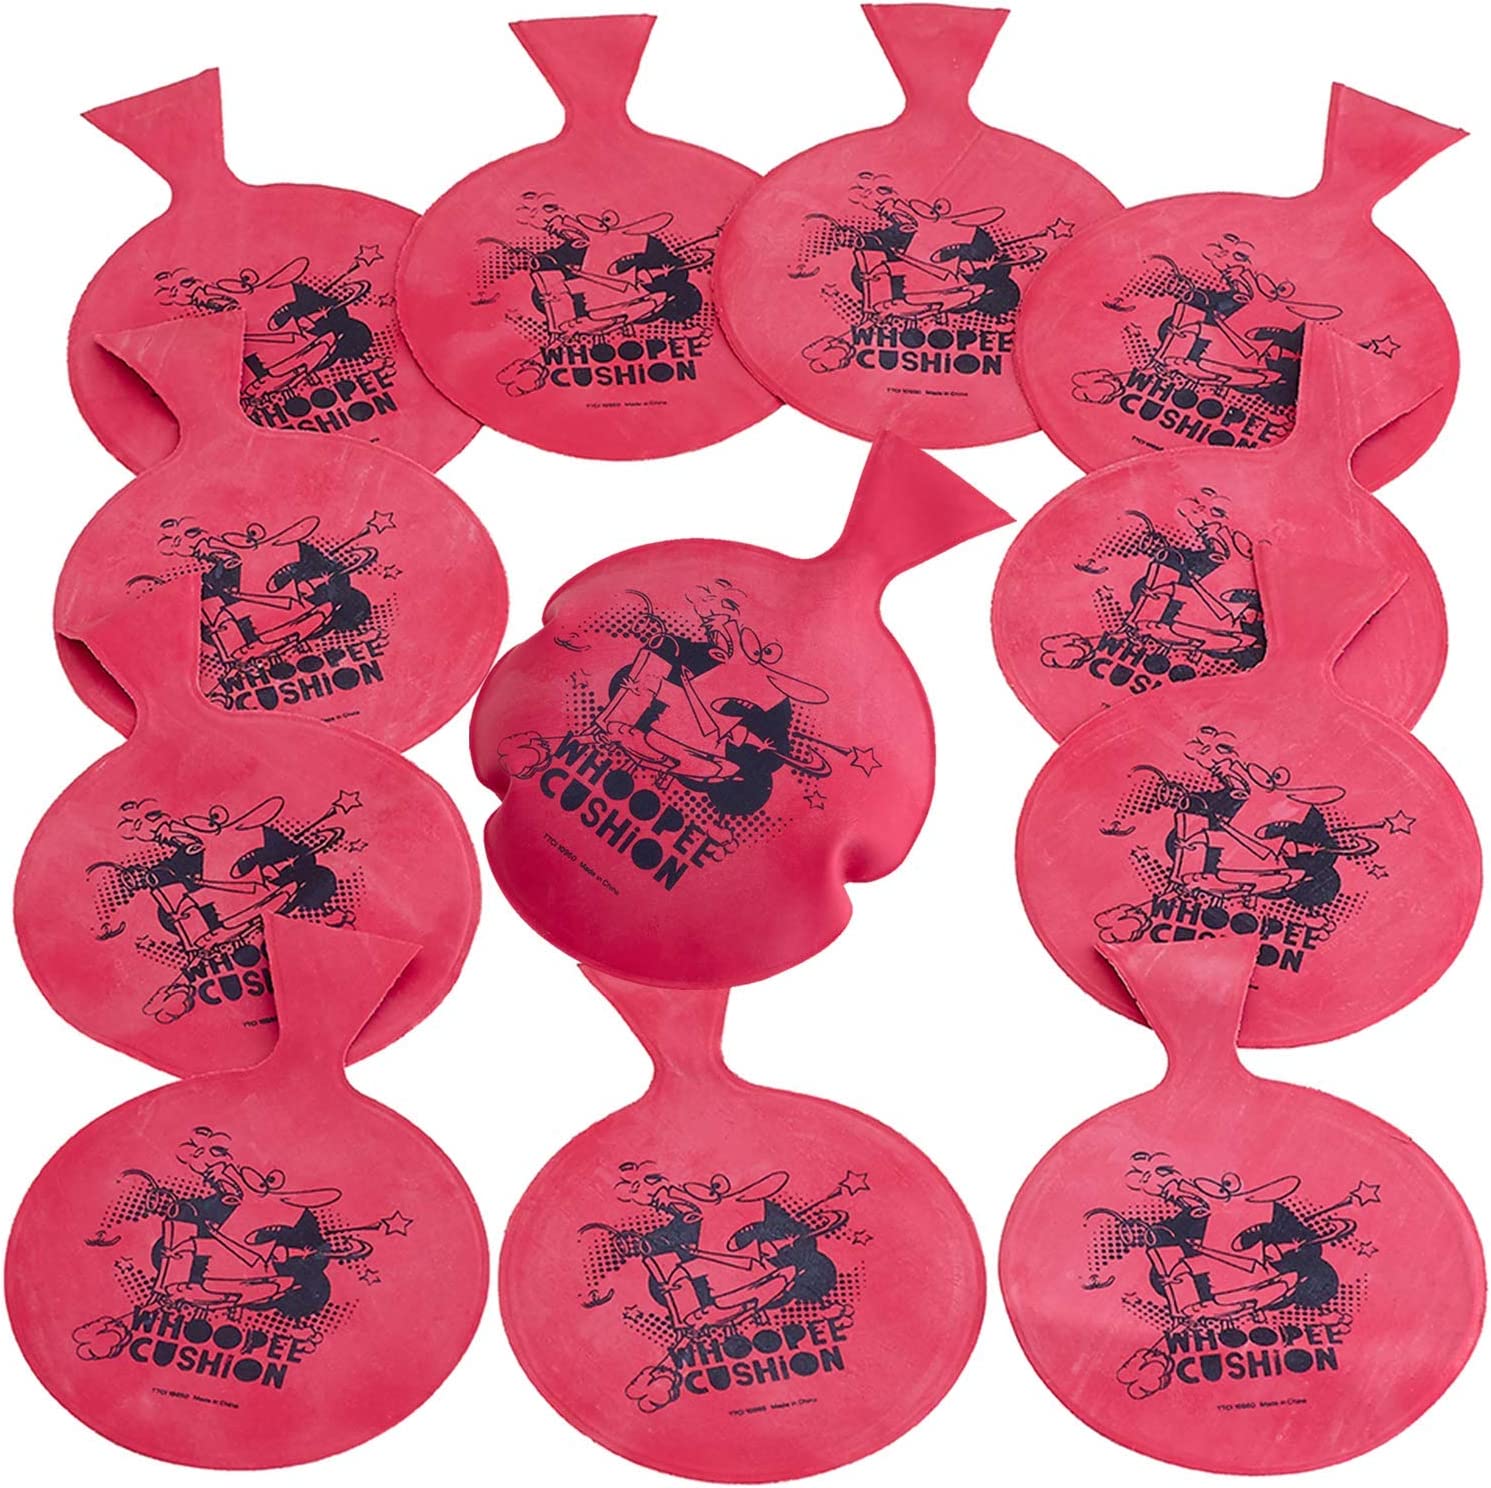 Kicko Miniature Whoopee Cushions - 12 Pack Mini Prank Novelty Toy for Parties and Rewards - 3 Inch Size - image 1 of 7